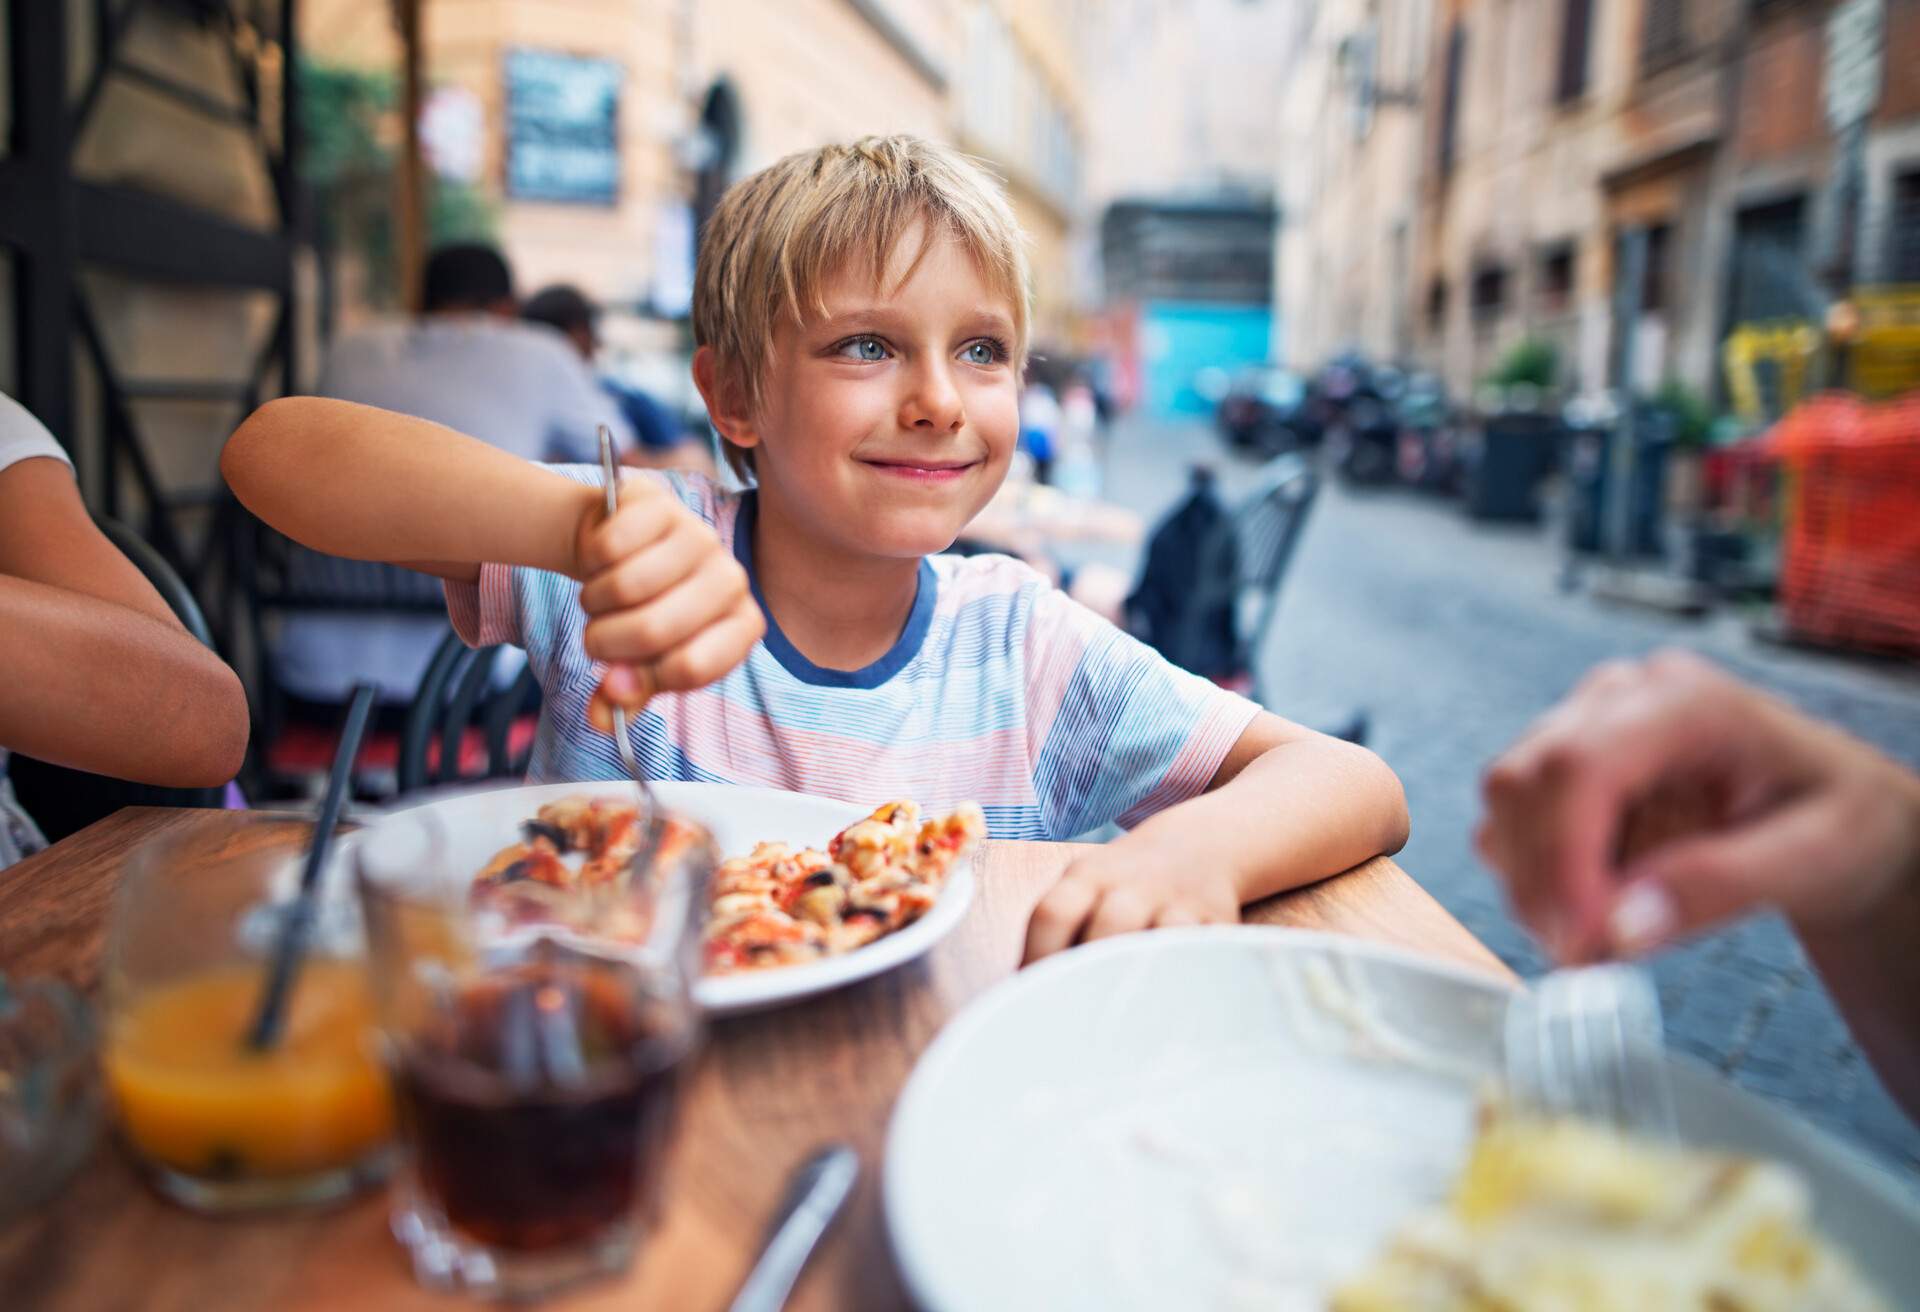 Little boy aged 7 having lunch with family in street restaurant in Rome, Italy. The girl is smiling and and looking sideways while getting a piece of pizza on the fork. Family is enjoying a happy meal together.